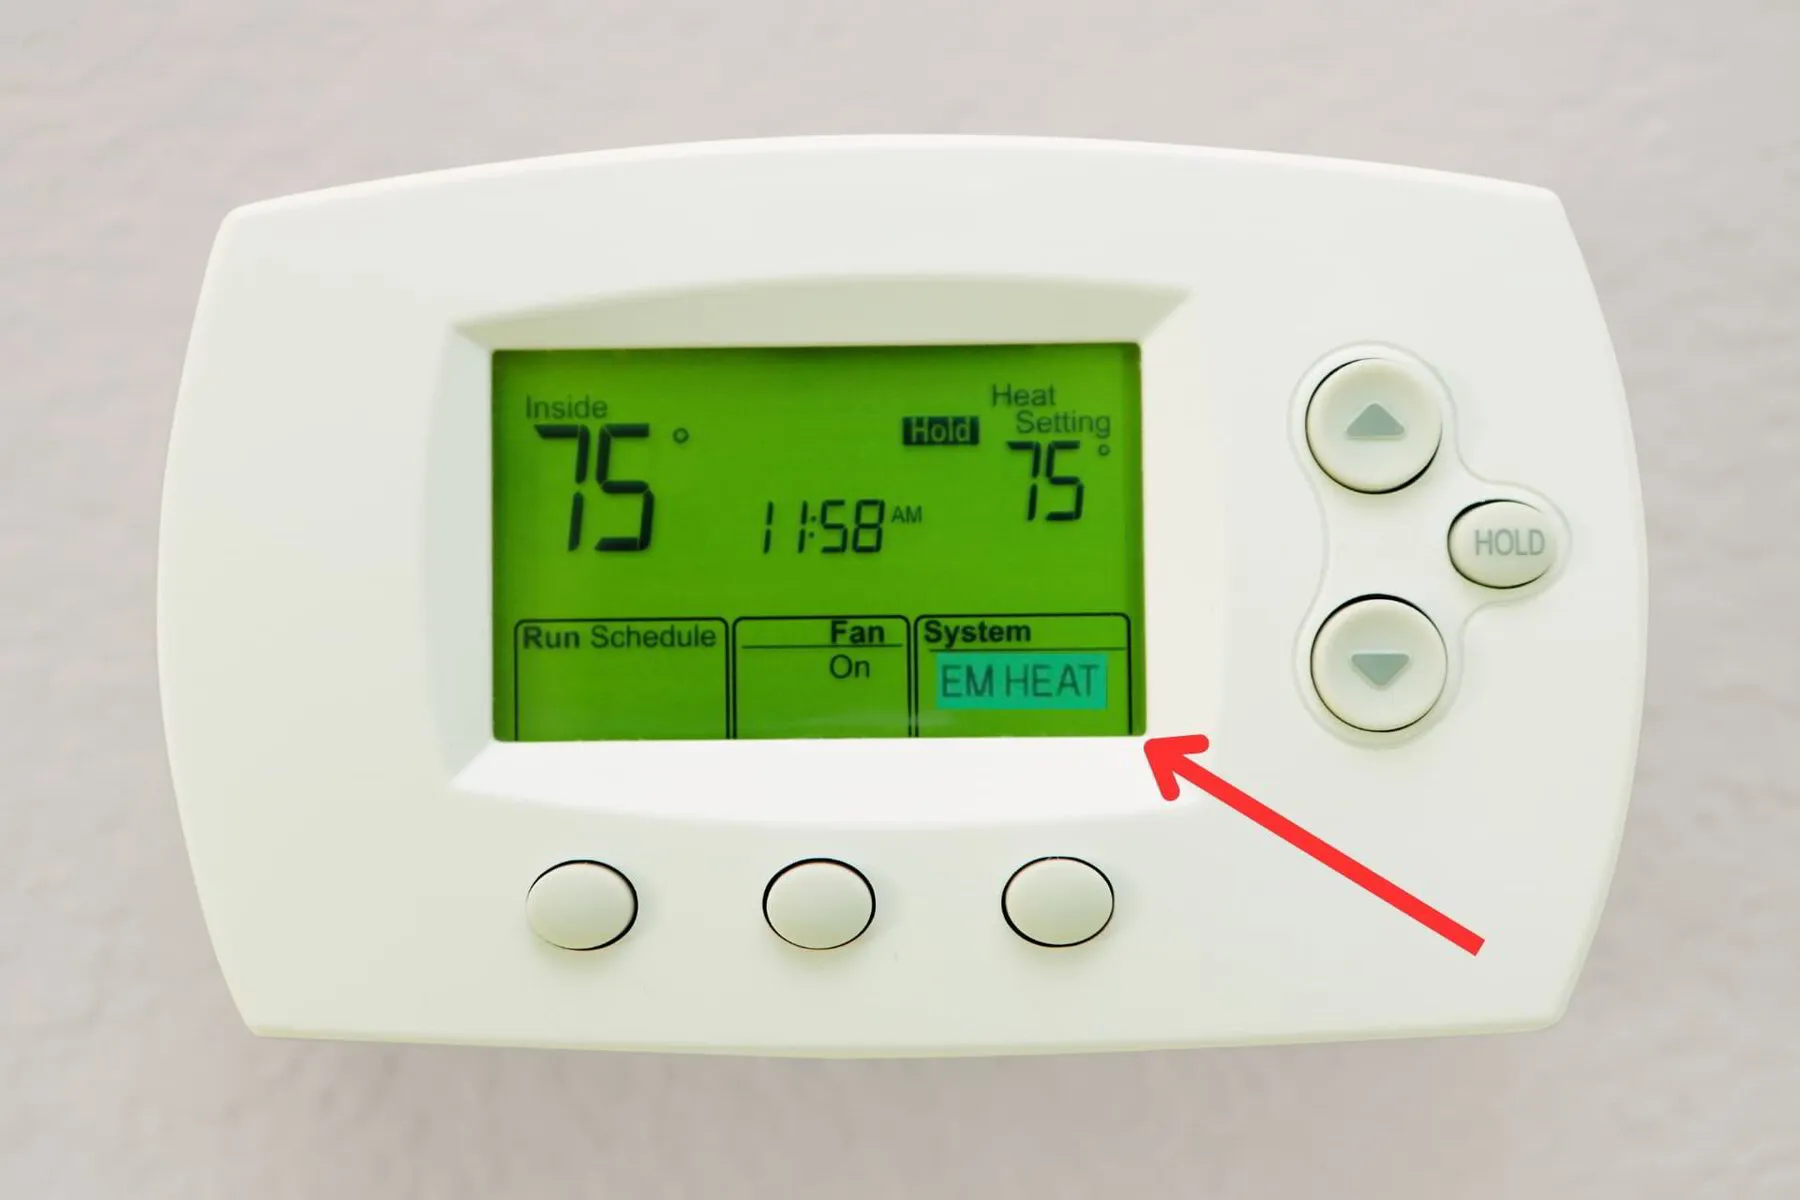 EM Heat shown on residential thermostat